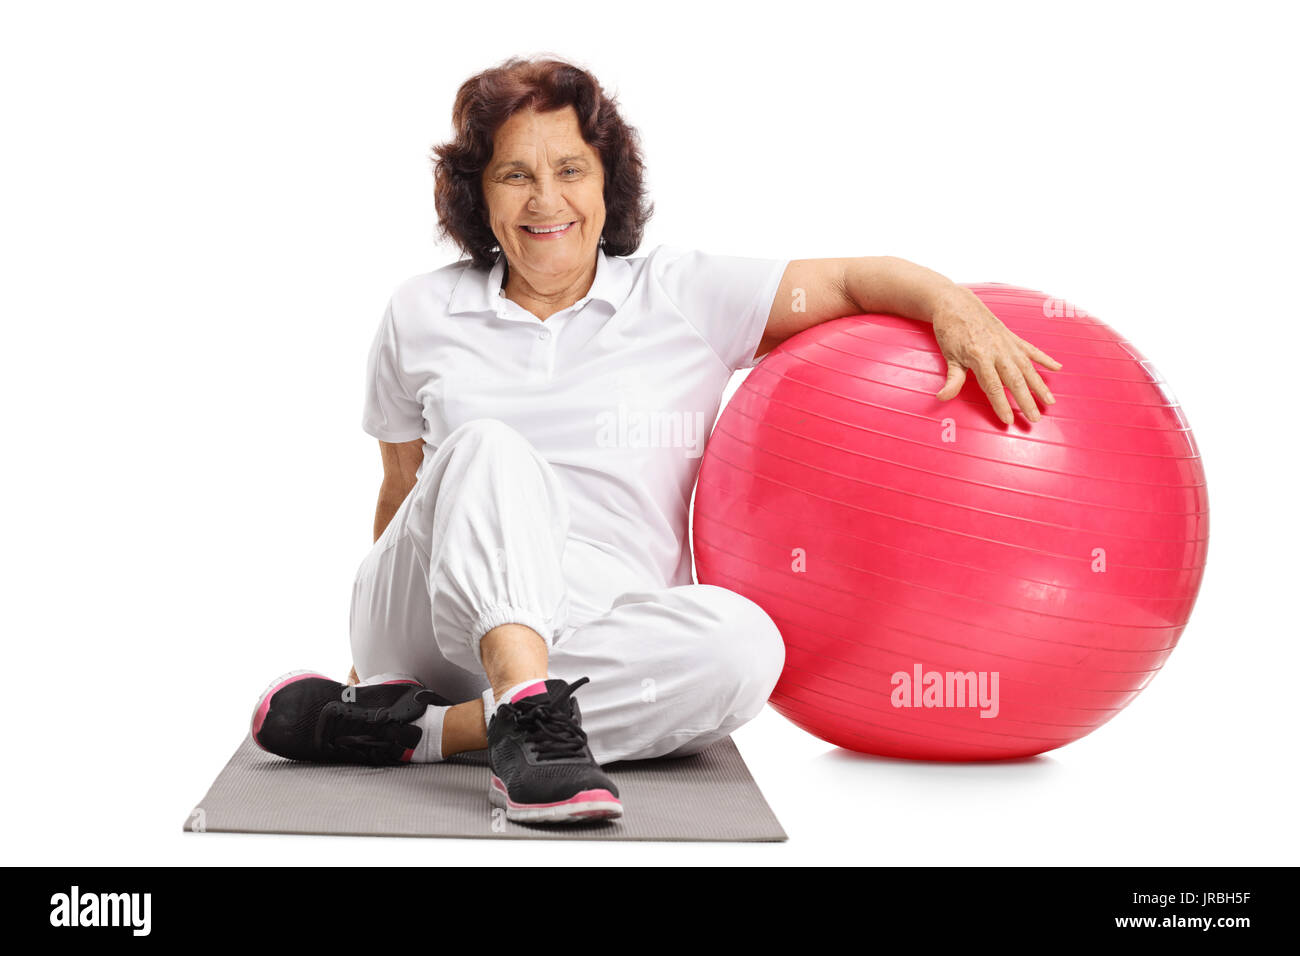 Elderly woman sitting on an exercise mat next to a pilates ball isolated on white background Stock Photo